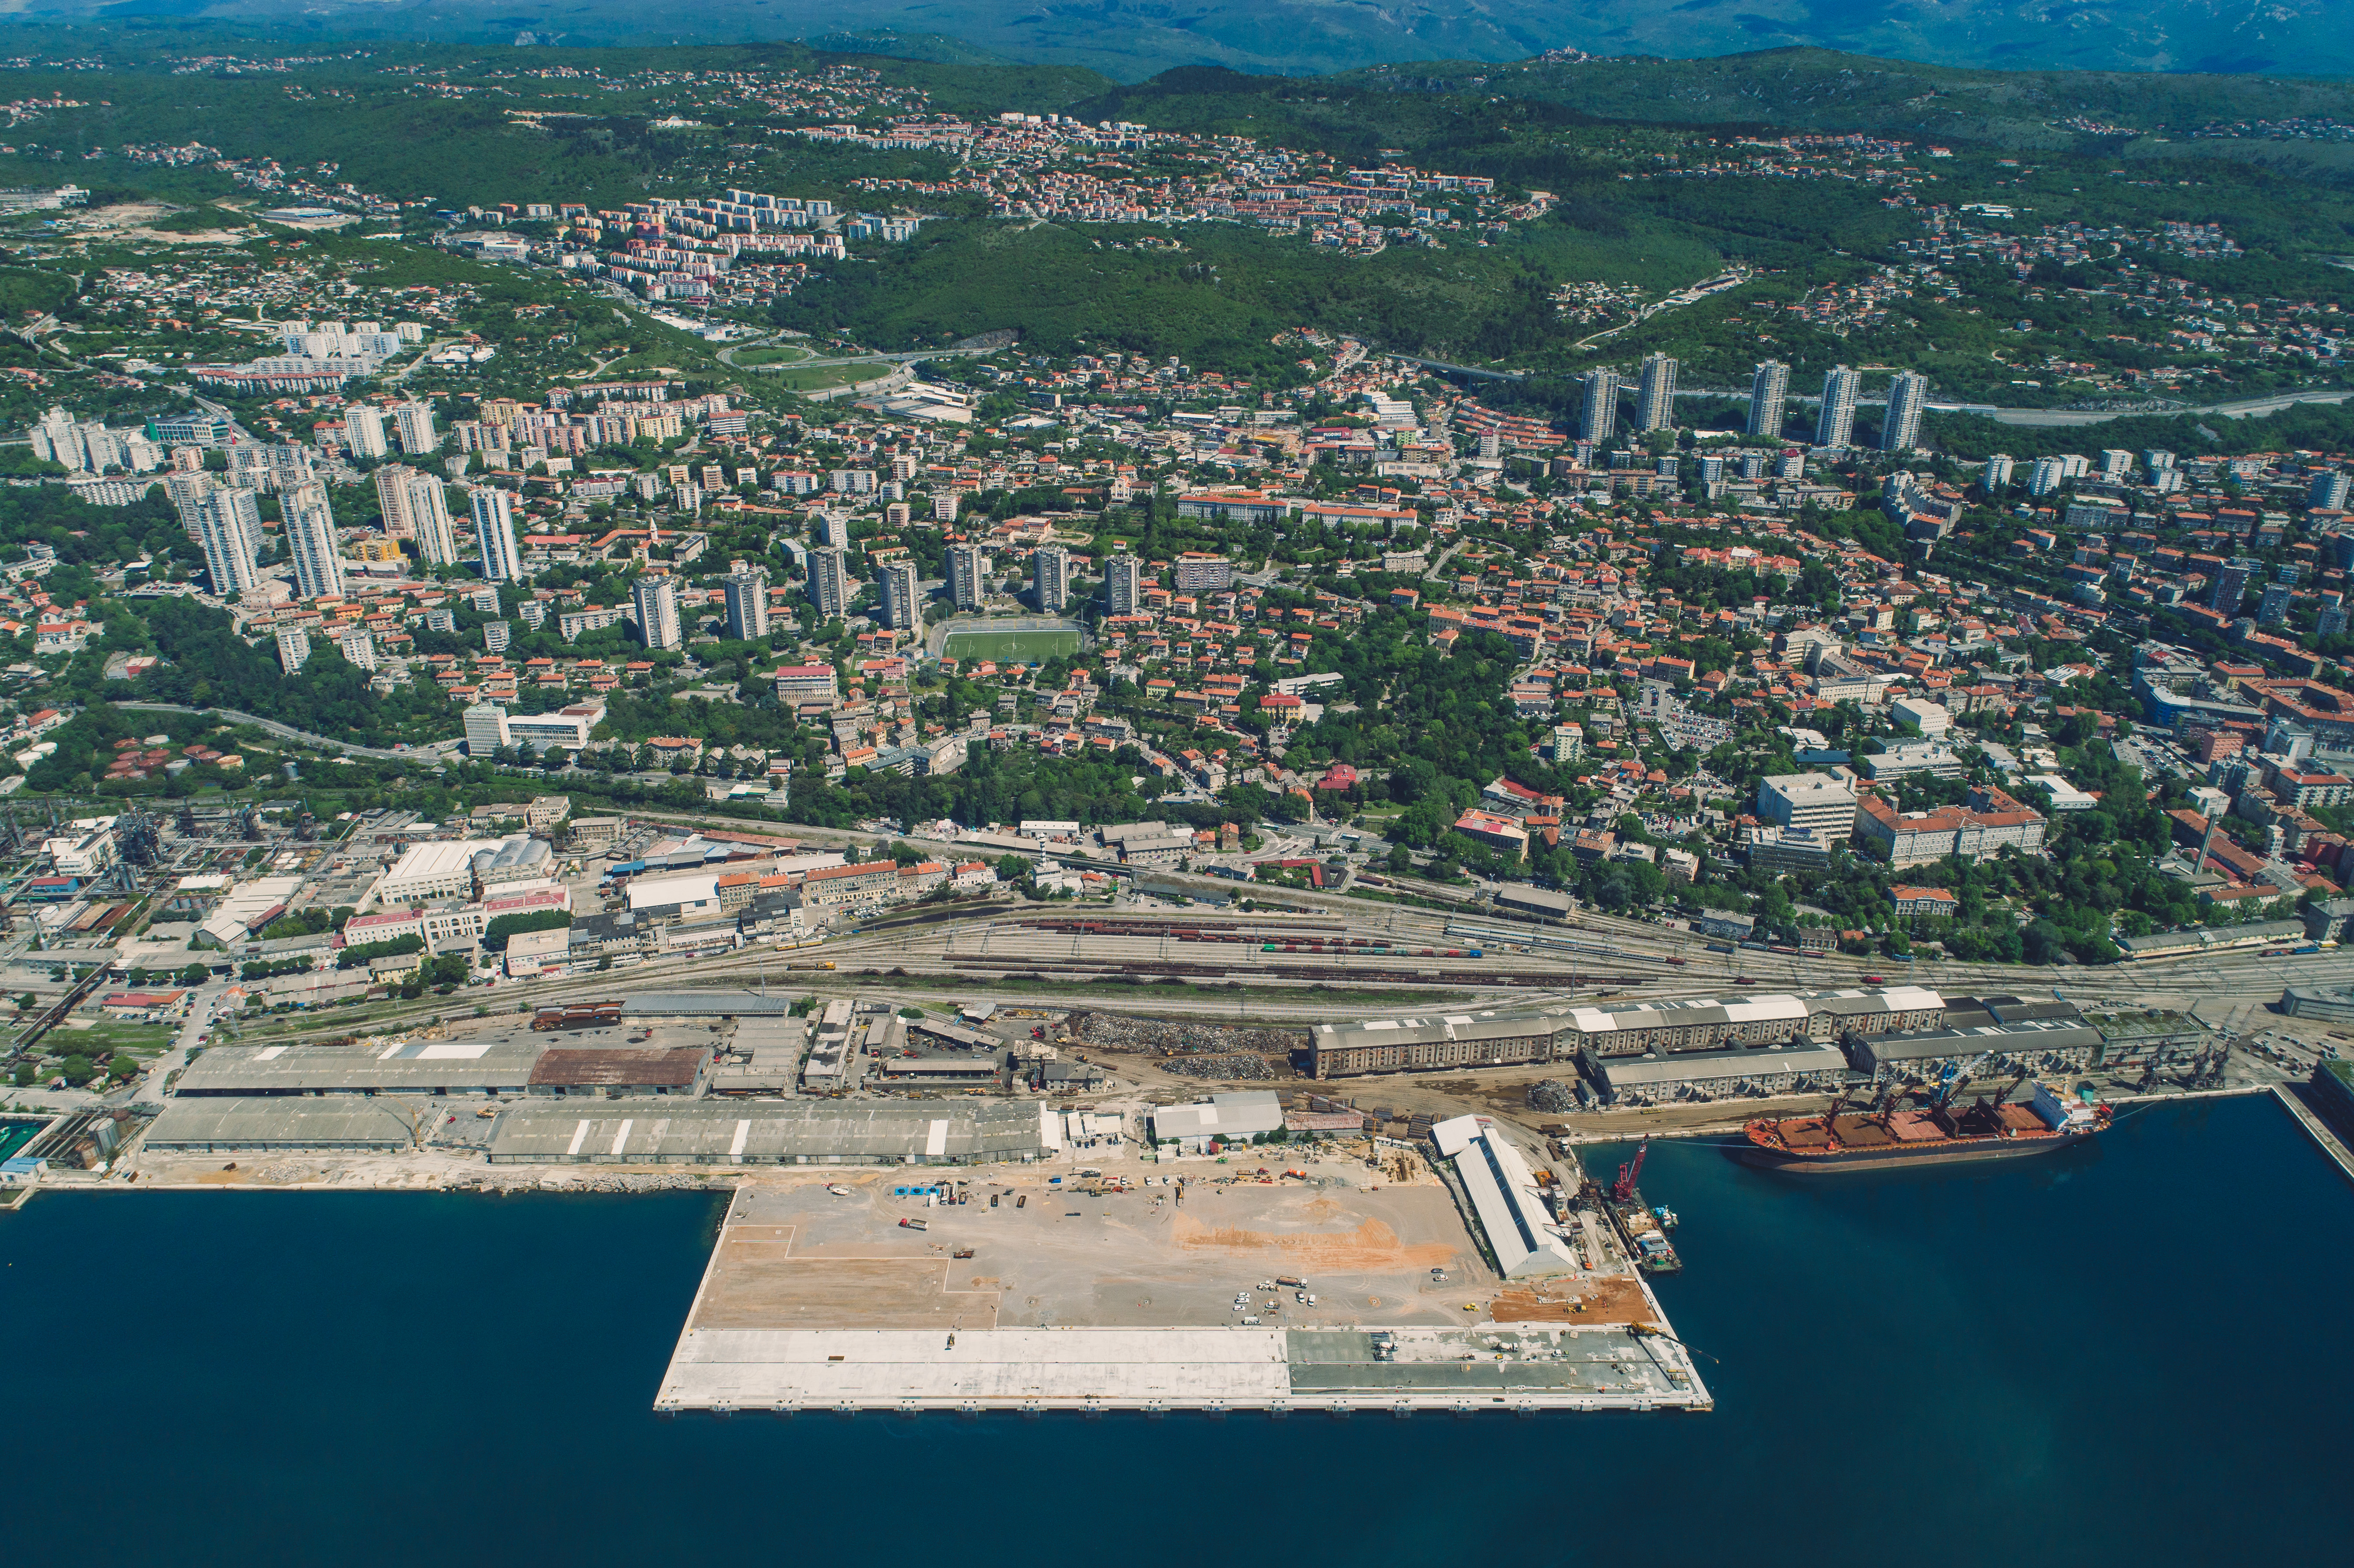 Completion of construction works on the Zagreb Deep Sea Container Terminal - Year 2019